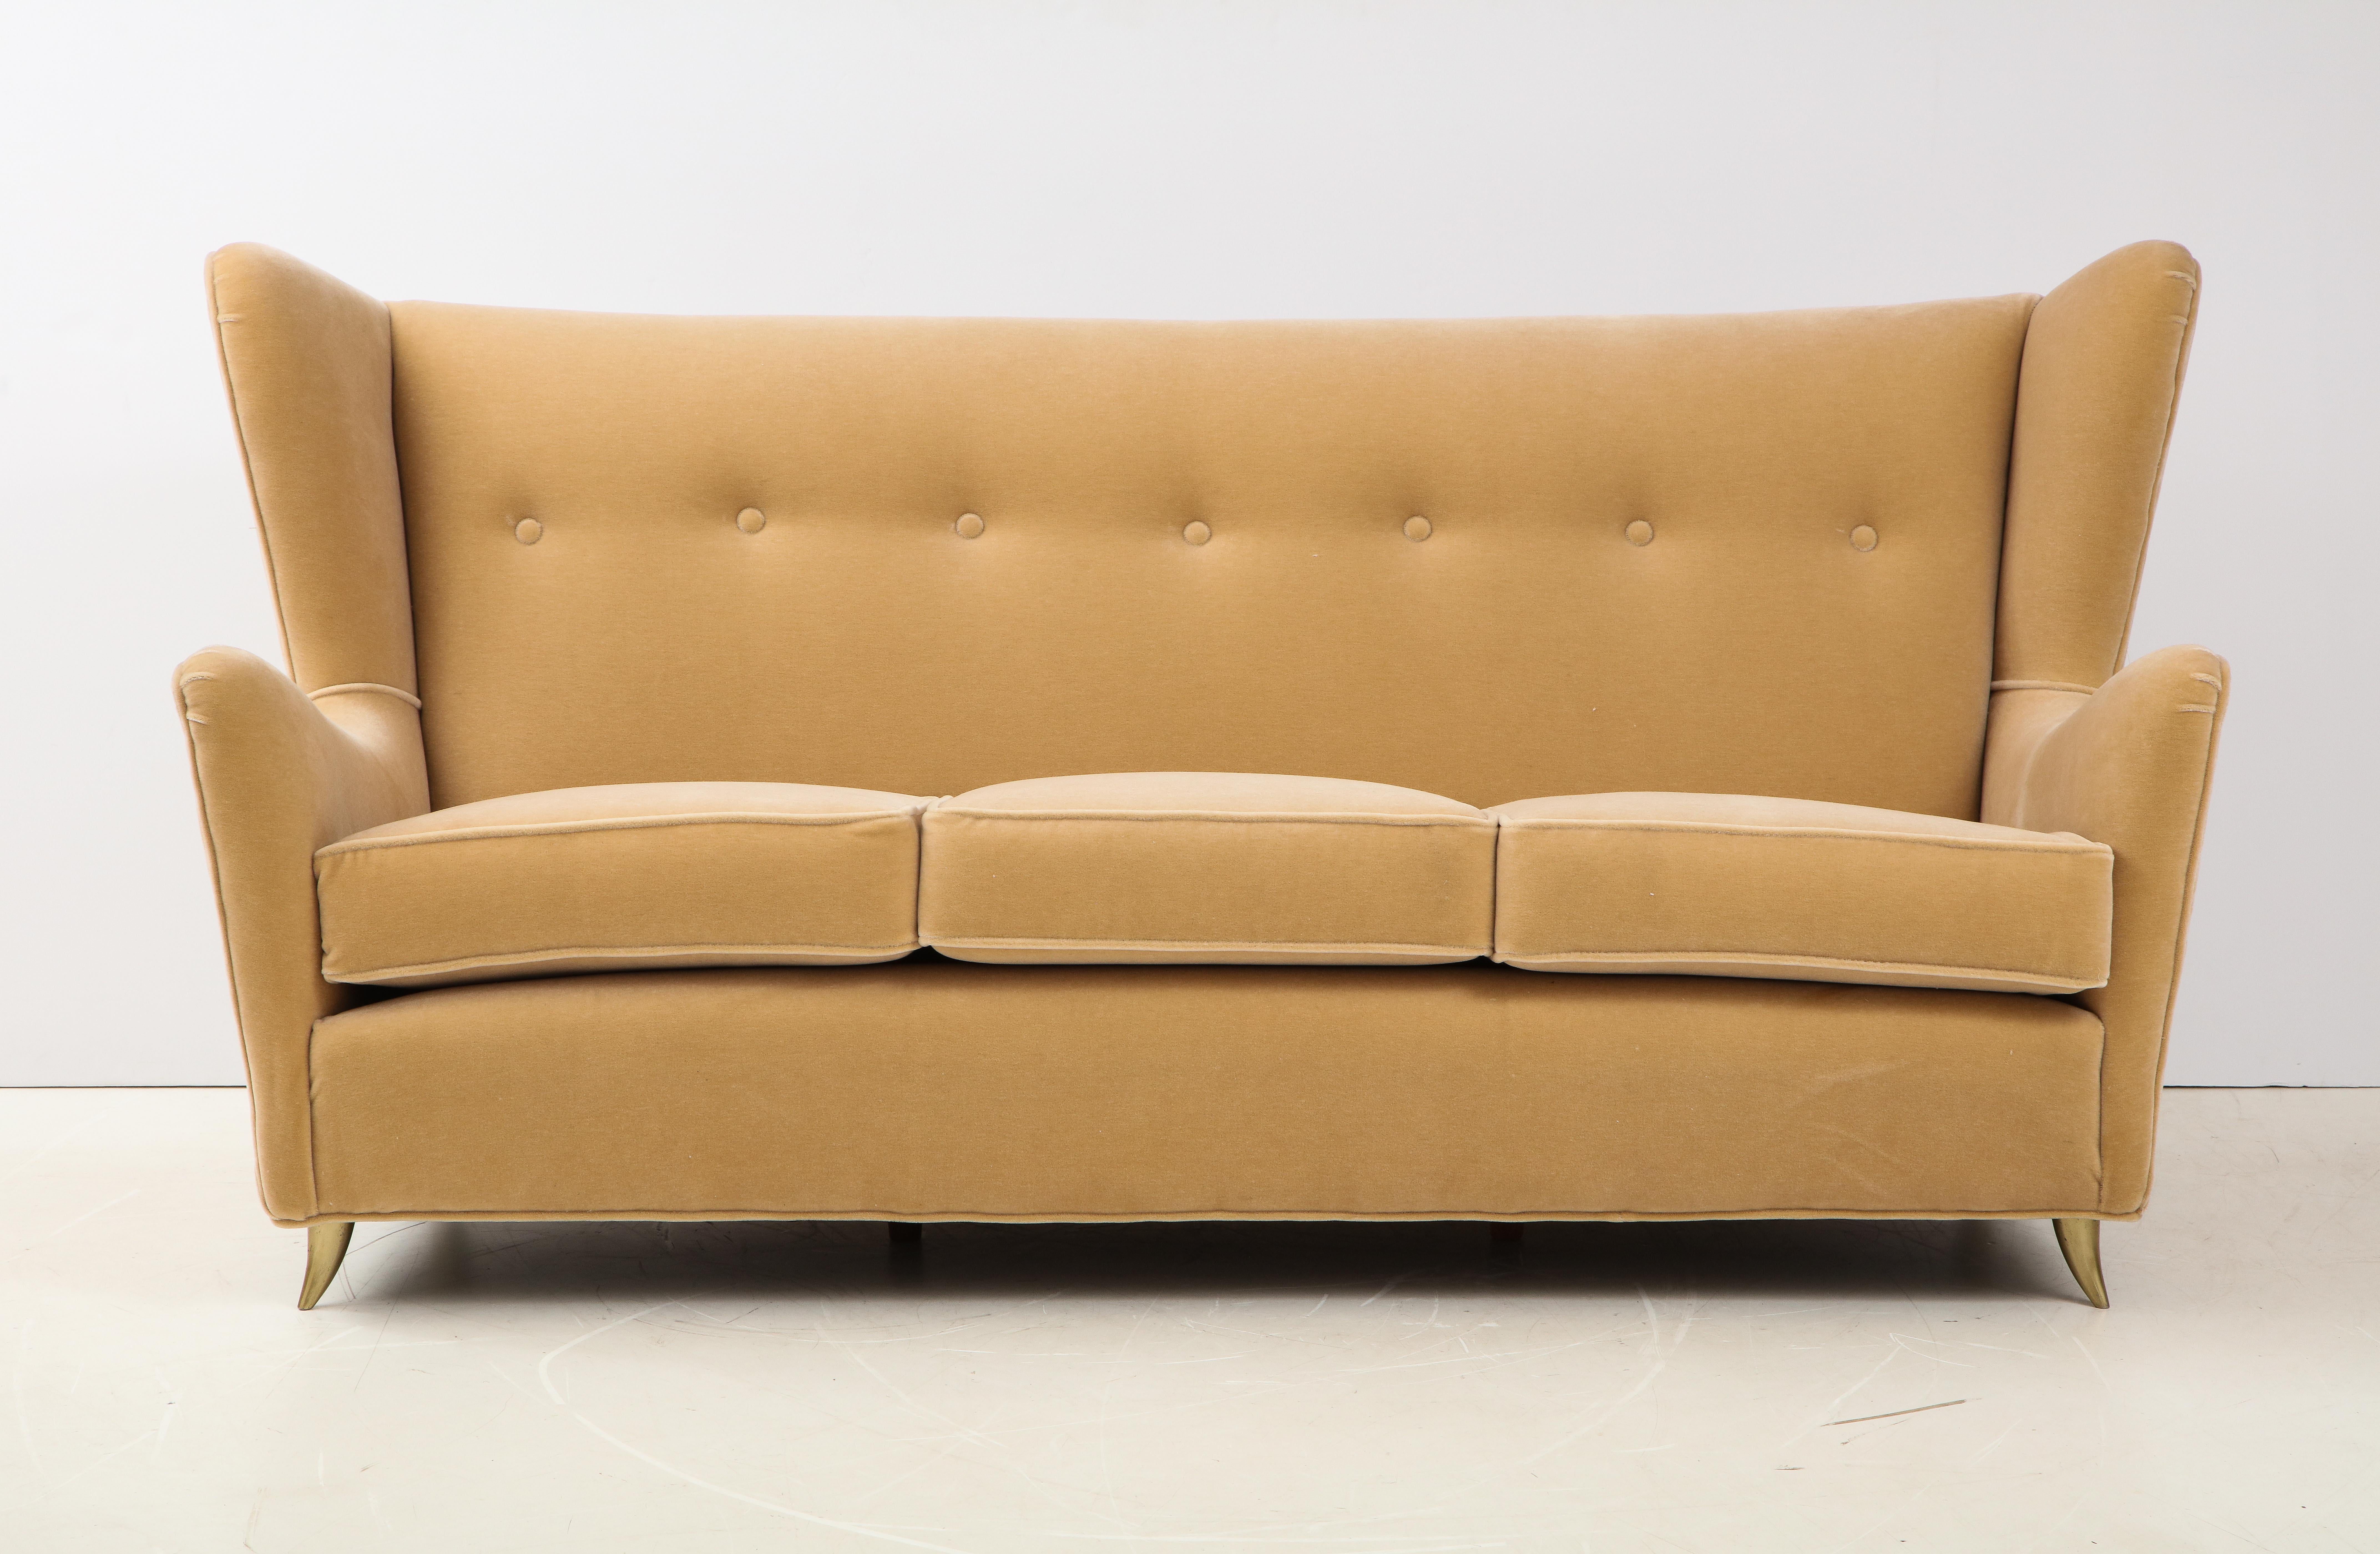 Stunning 1950s Italian wingback sofa with brass legs in the of Gio Ponti. Newly upholstered in mohair fabric.